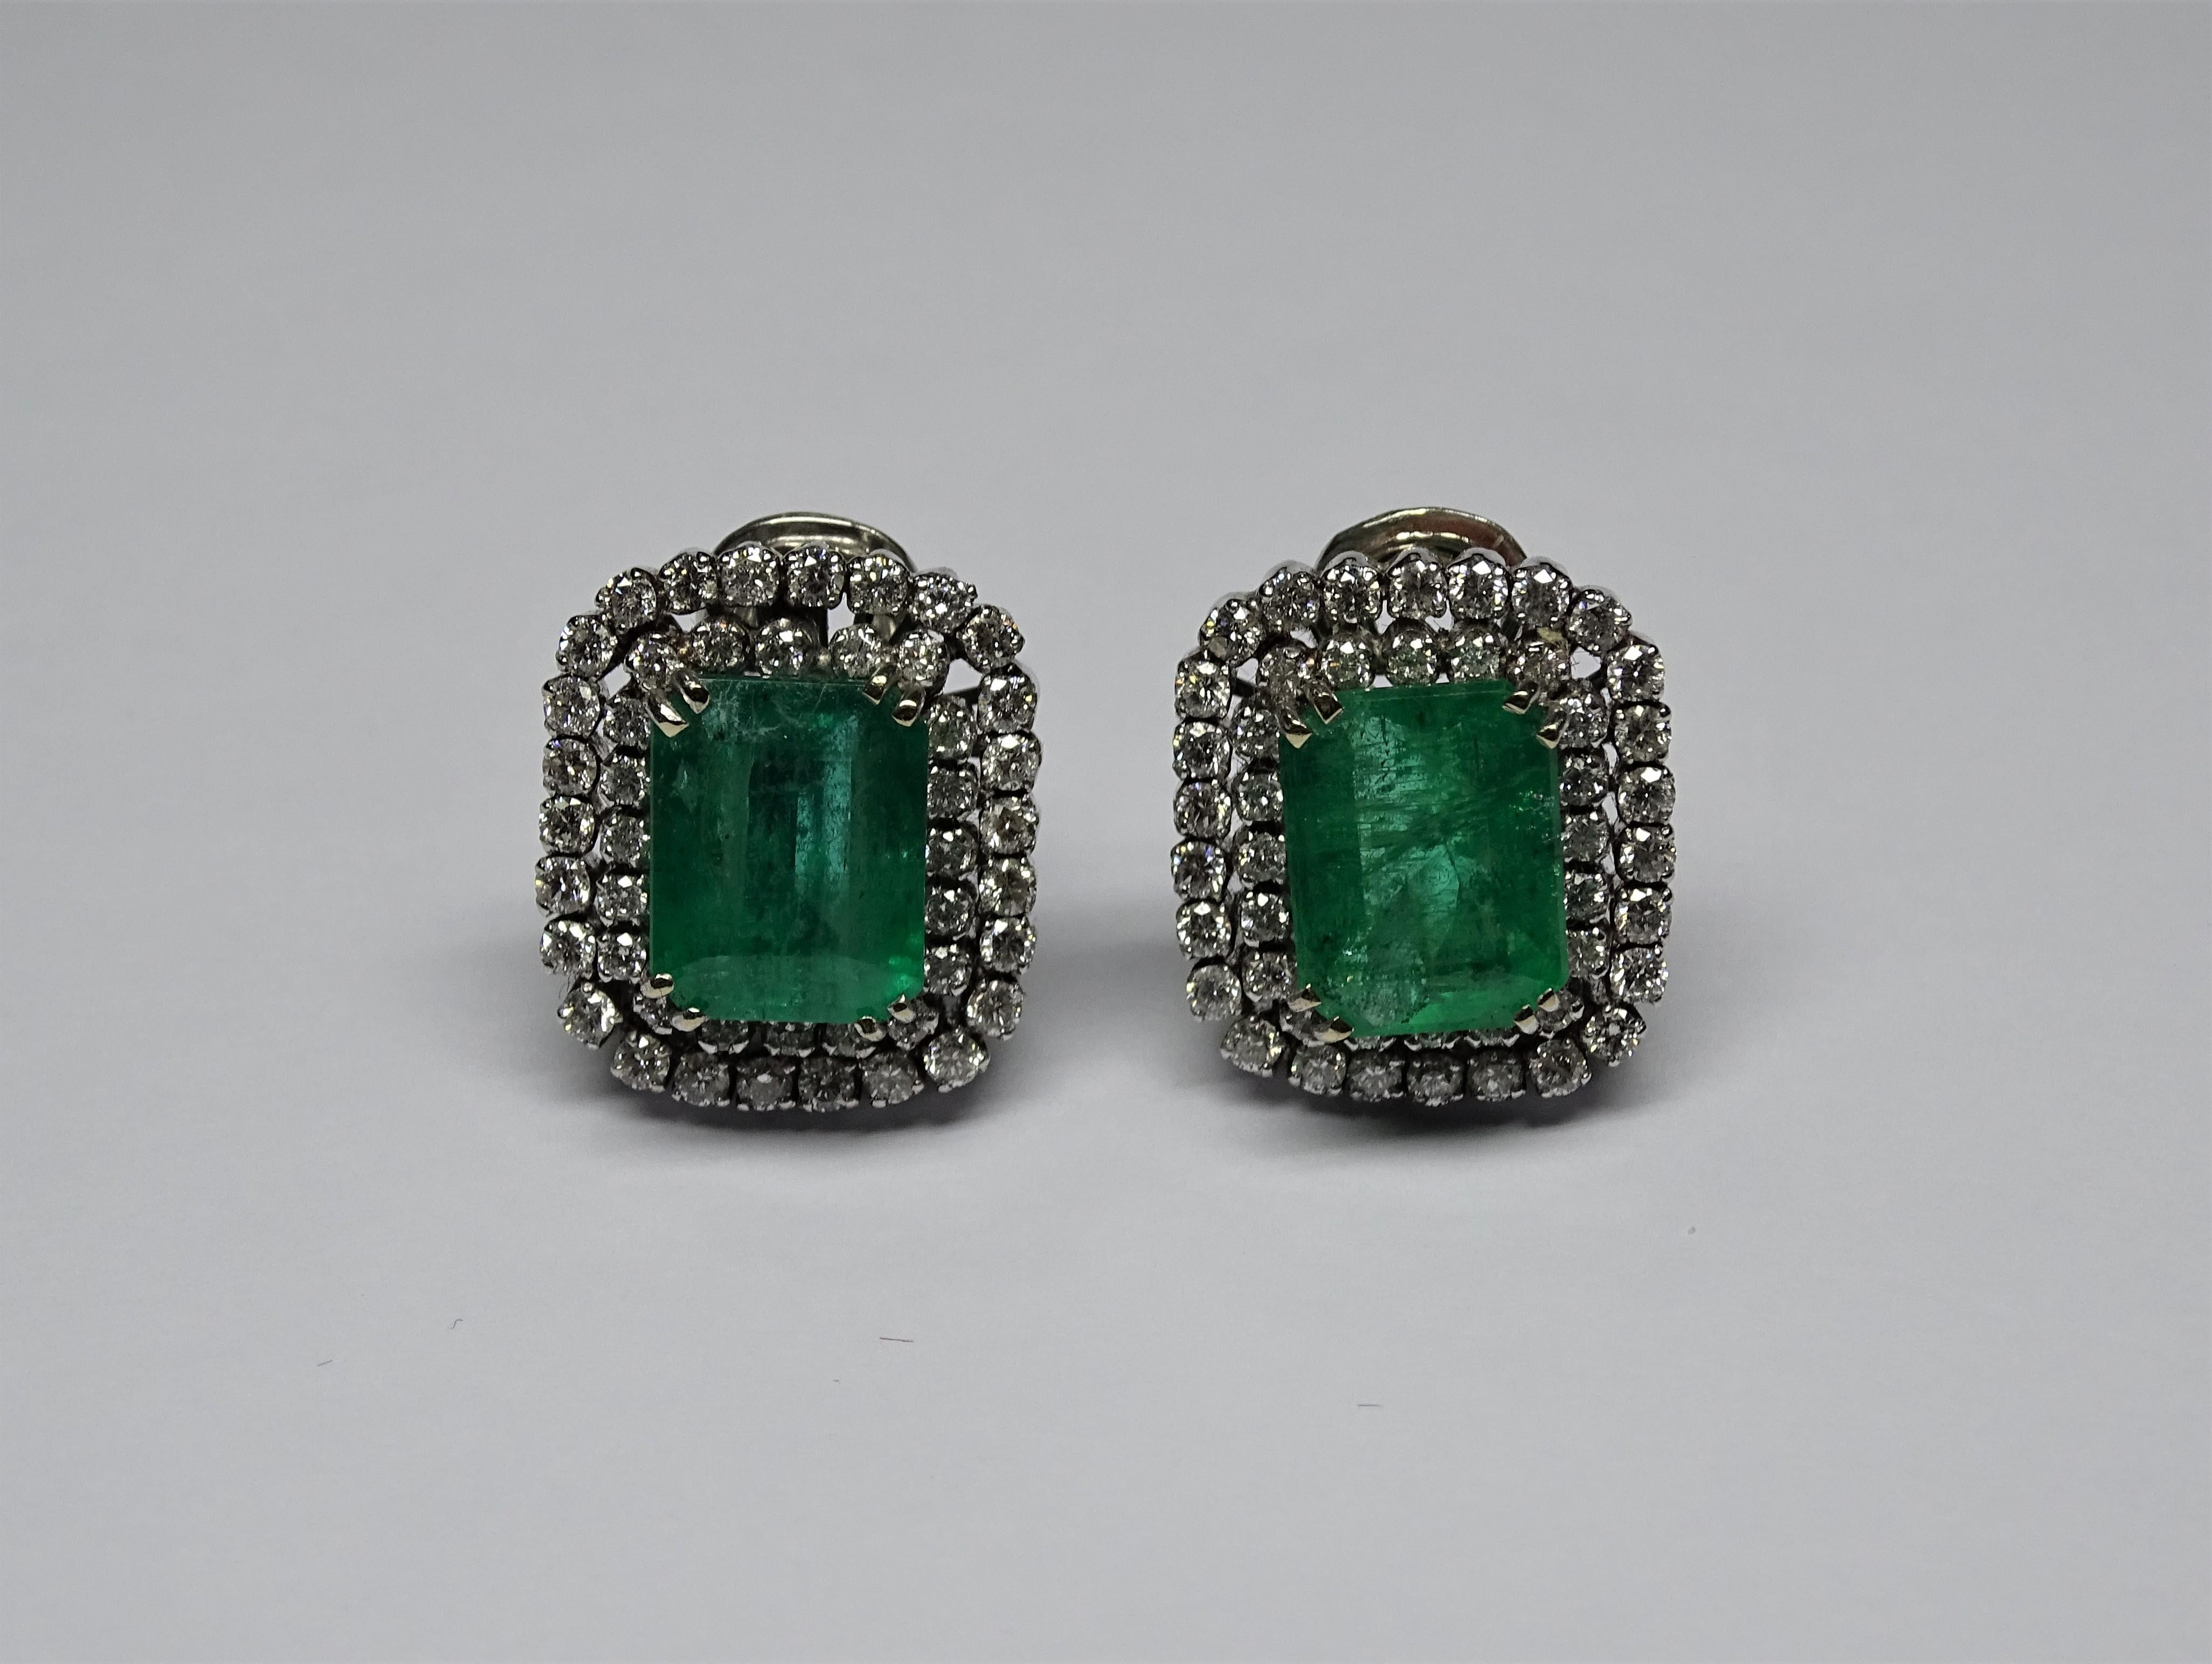 These Earrings are made of 18K White Gold.
These Earrings have 2.02 Carats of White Round Cut Diamonds.
These Earrings have 9.79 Carats of Natural Emeralds.
All our Earrings have pins for pierced ears but we can change the closure and make any of